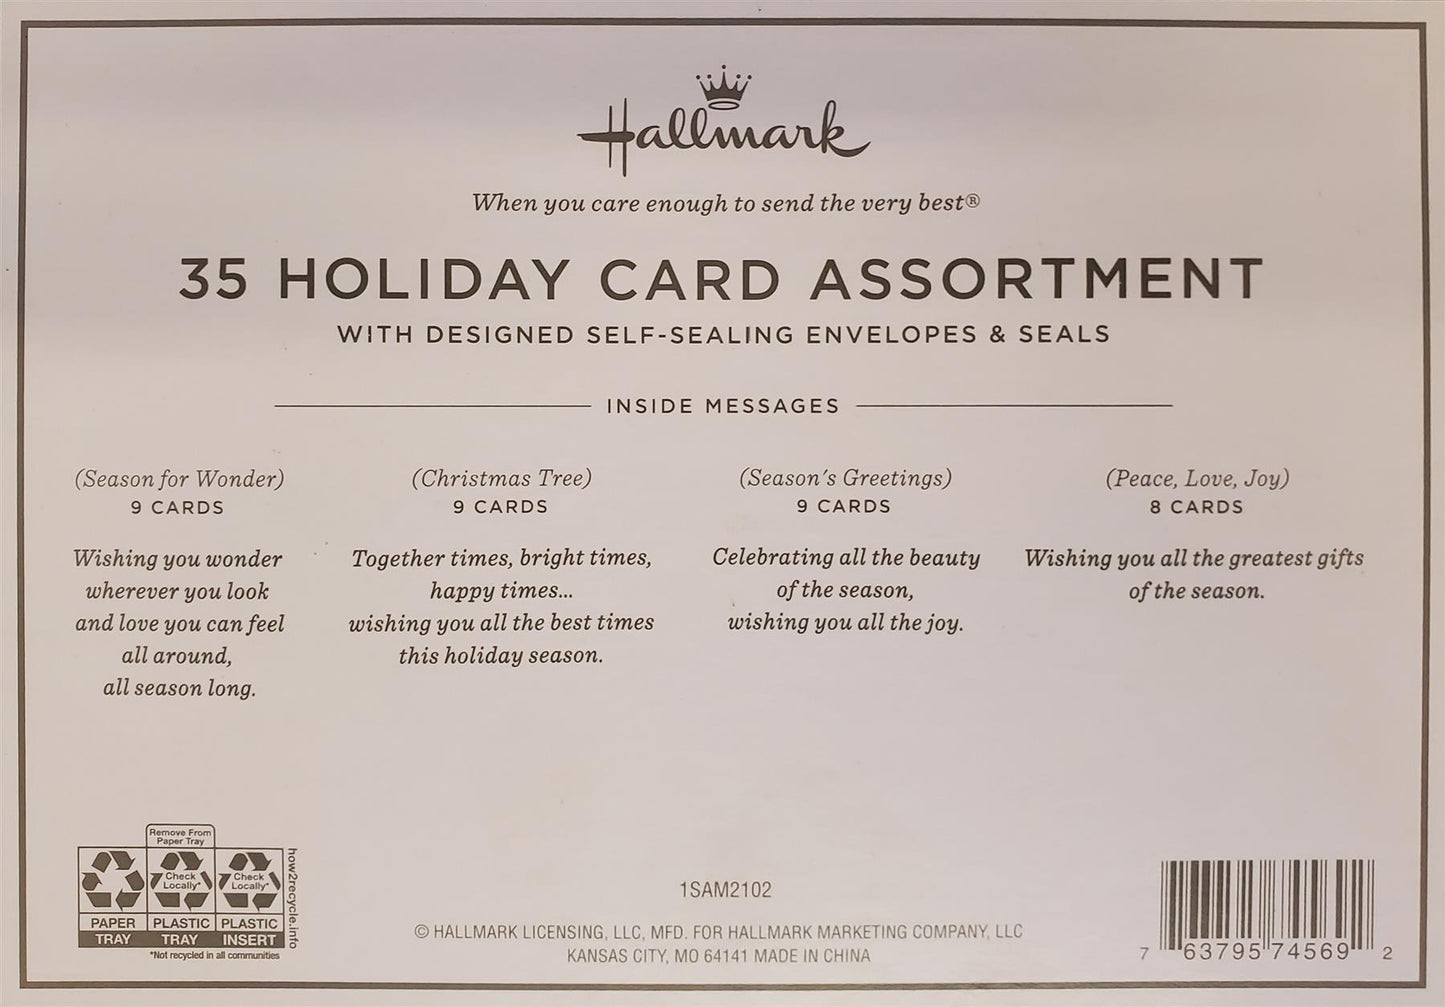 Hallmark Boxed Christmas Cards Assortment, Holiday Season (4 Designs, 35 Cards and Envelopes)